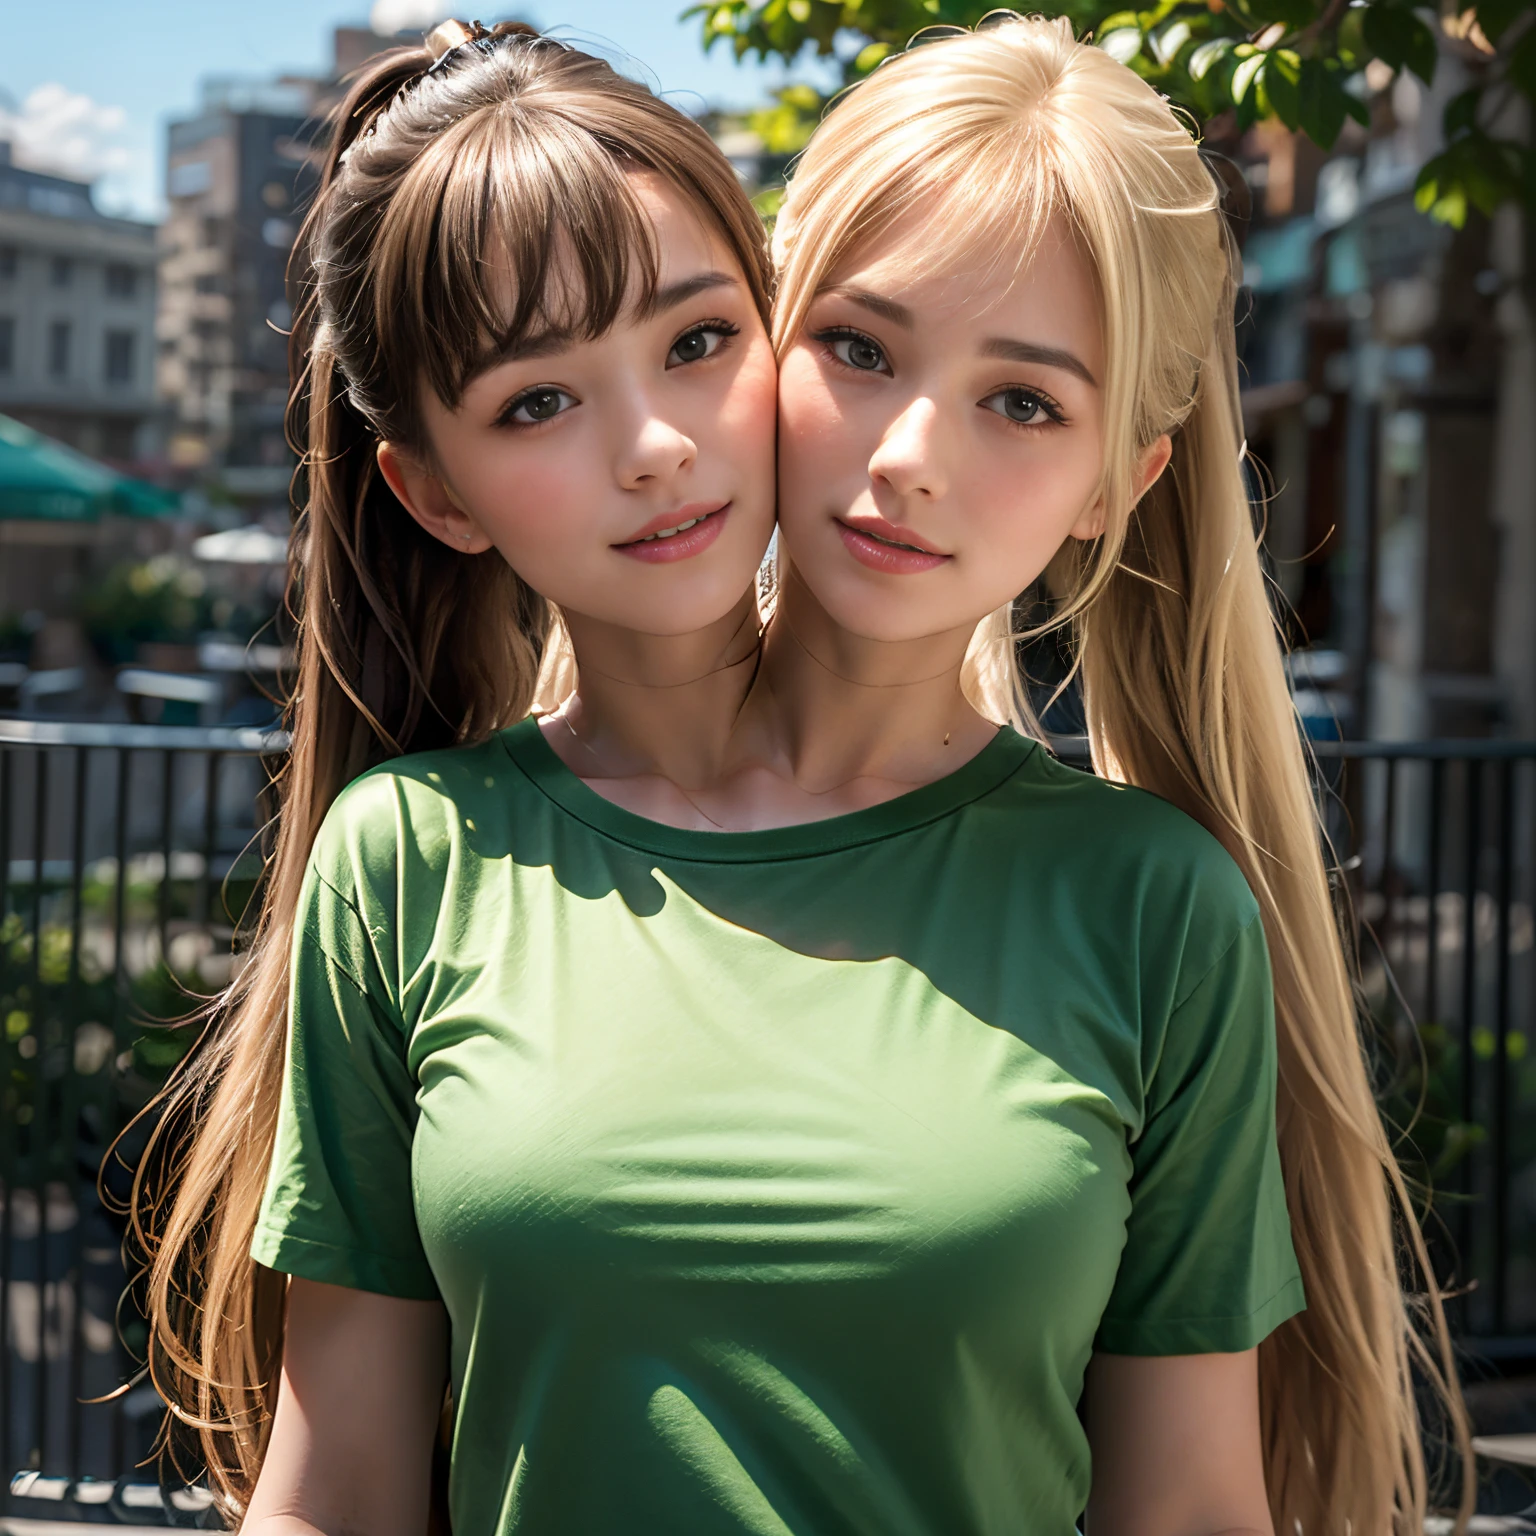 (best quality, 2heads, european girl with two head kissing girl on cheek, different hair bangs, blonde hair, long hair one head, ponytail other head,half color t-shirt,park background,)